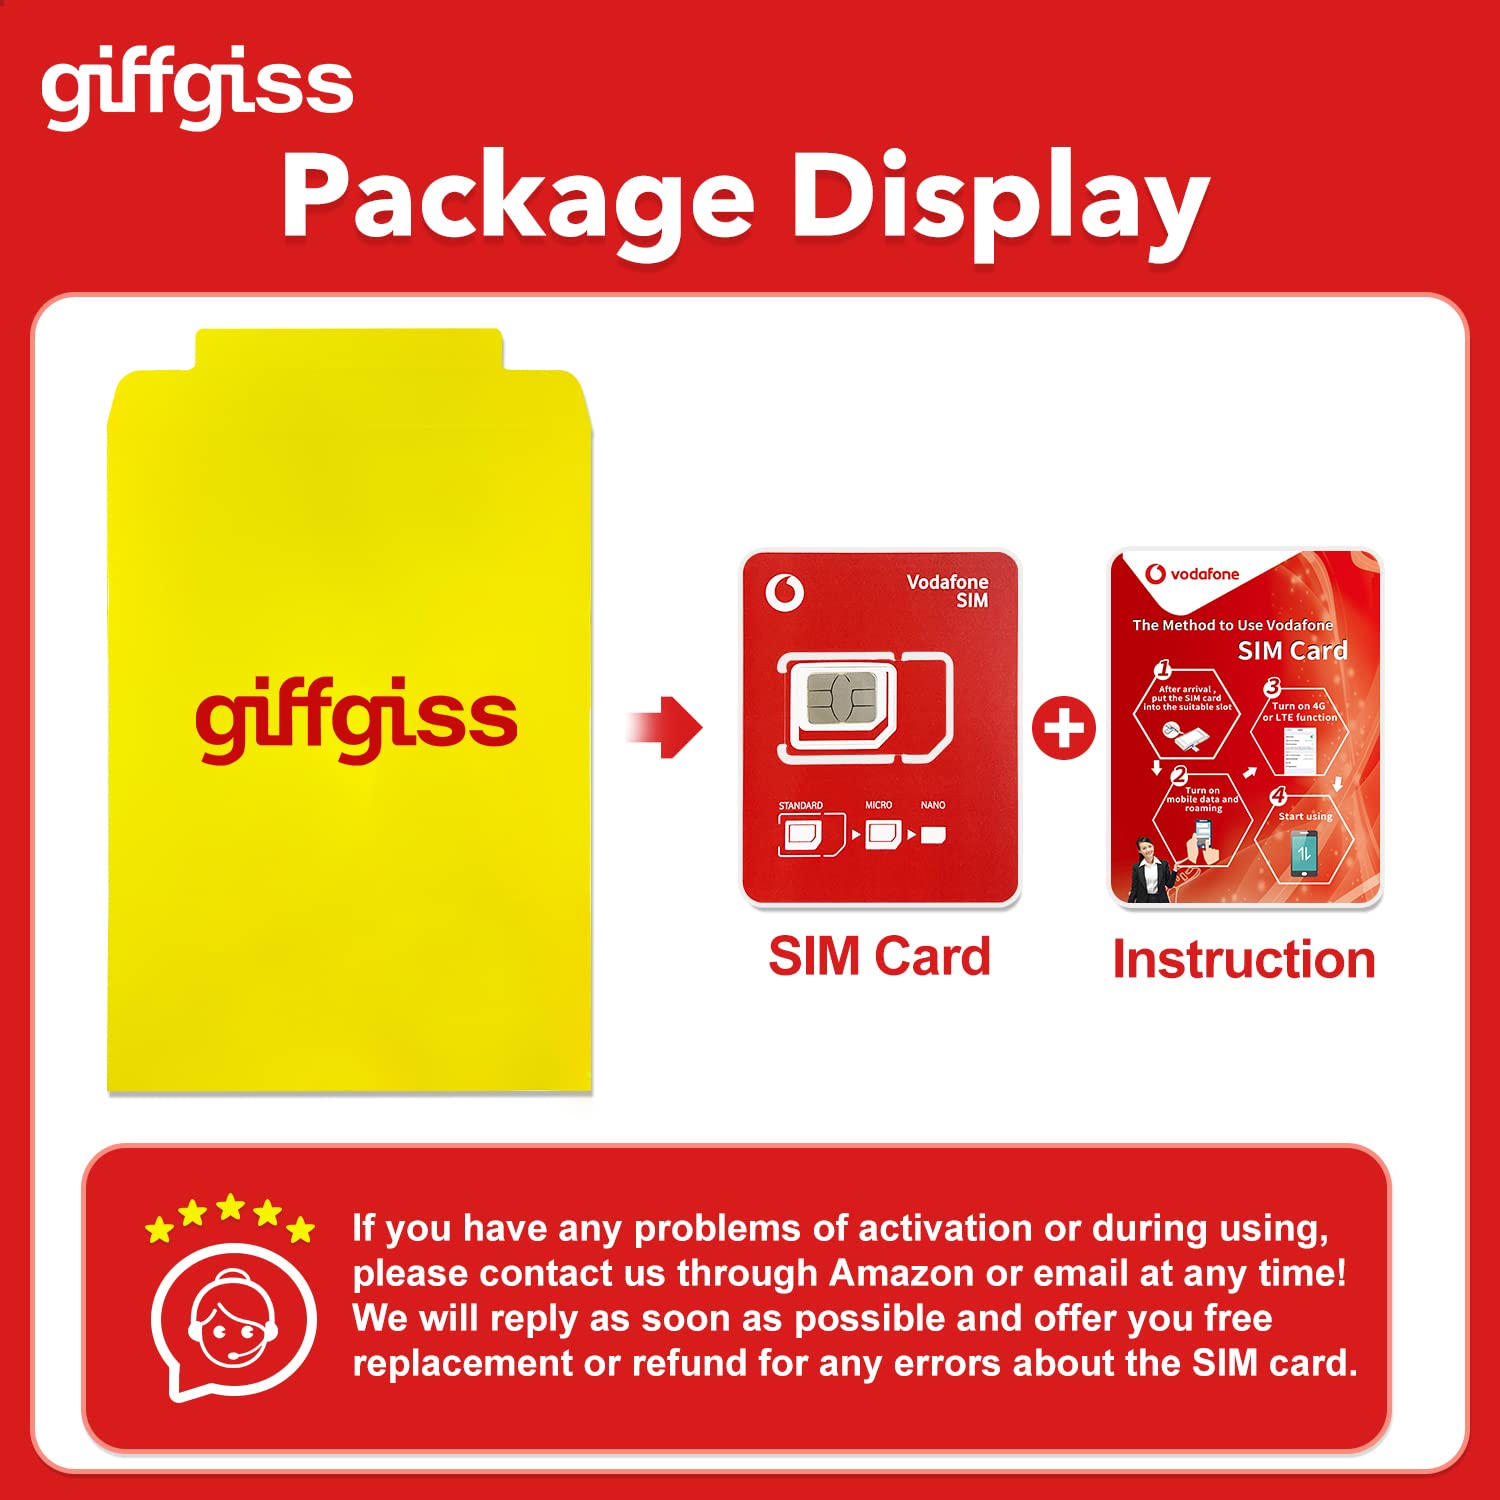 giffgiss Vodafone Europe Prepaid SIM Card 14GB Data+800 min in 34 Countries (Spain 100GB+Unlimited Calls,Turkey 400 Minutes) Supported Mobile Hotspot Travel Use in UK Switzerland Turkey 28 Days